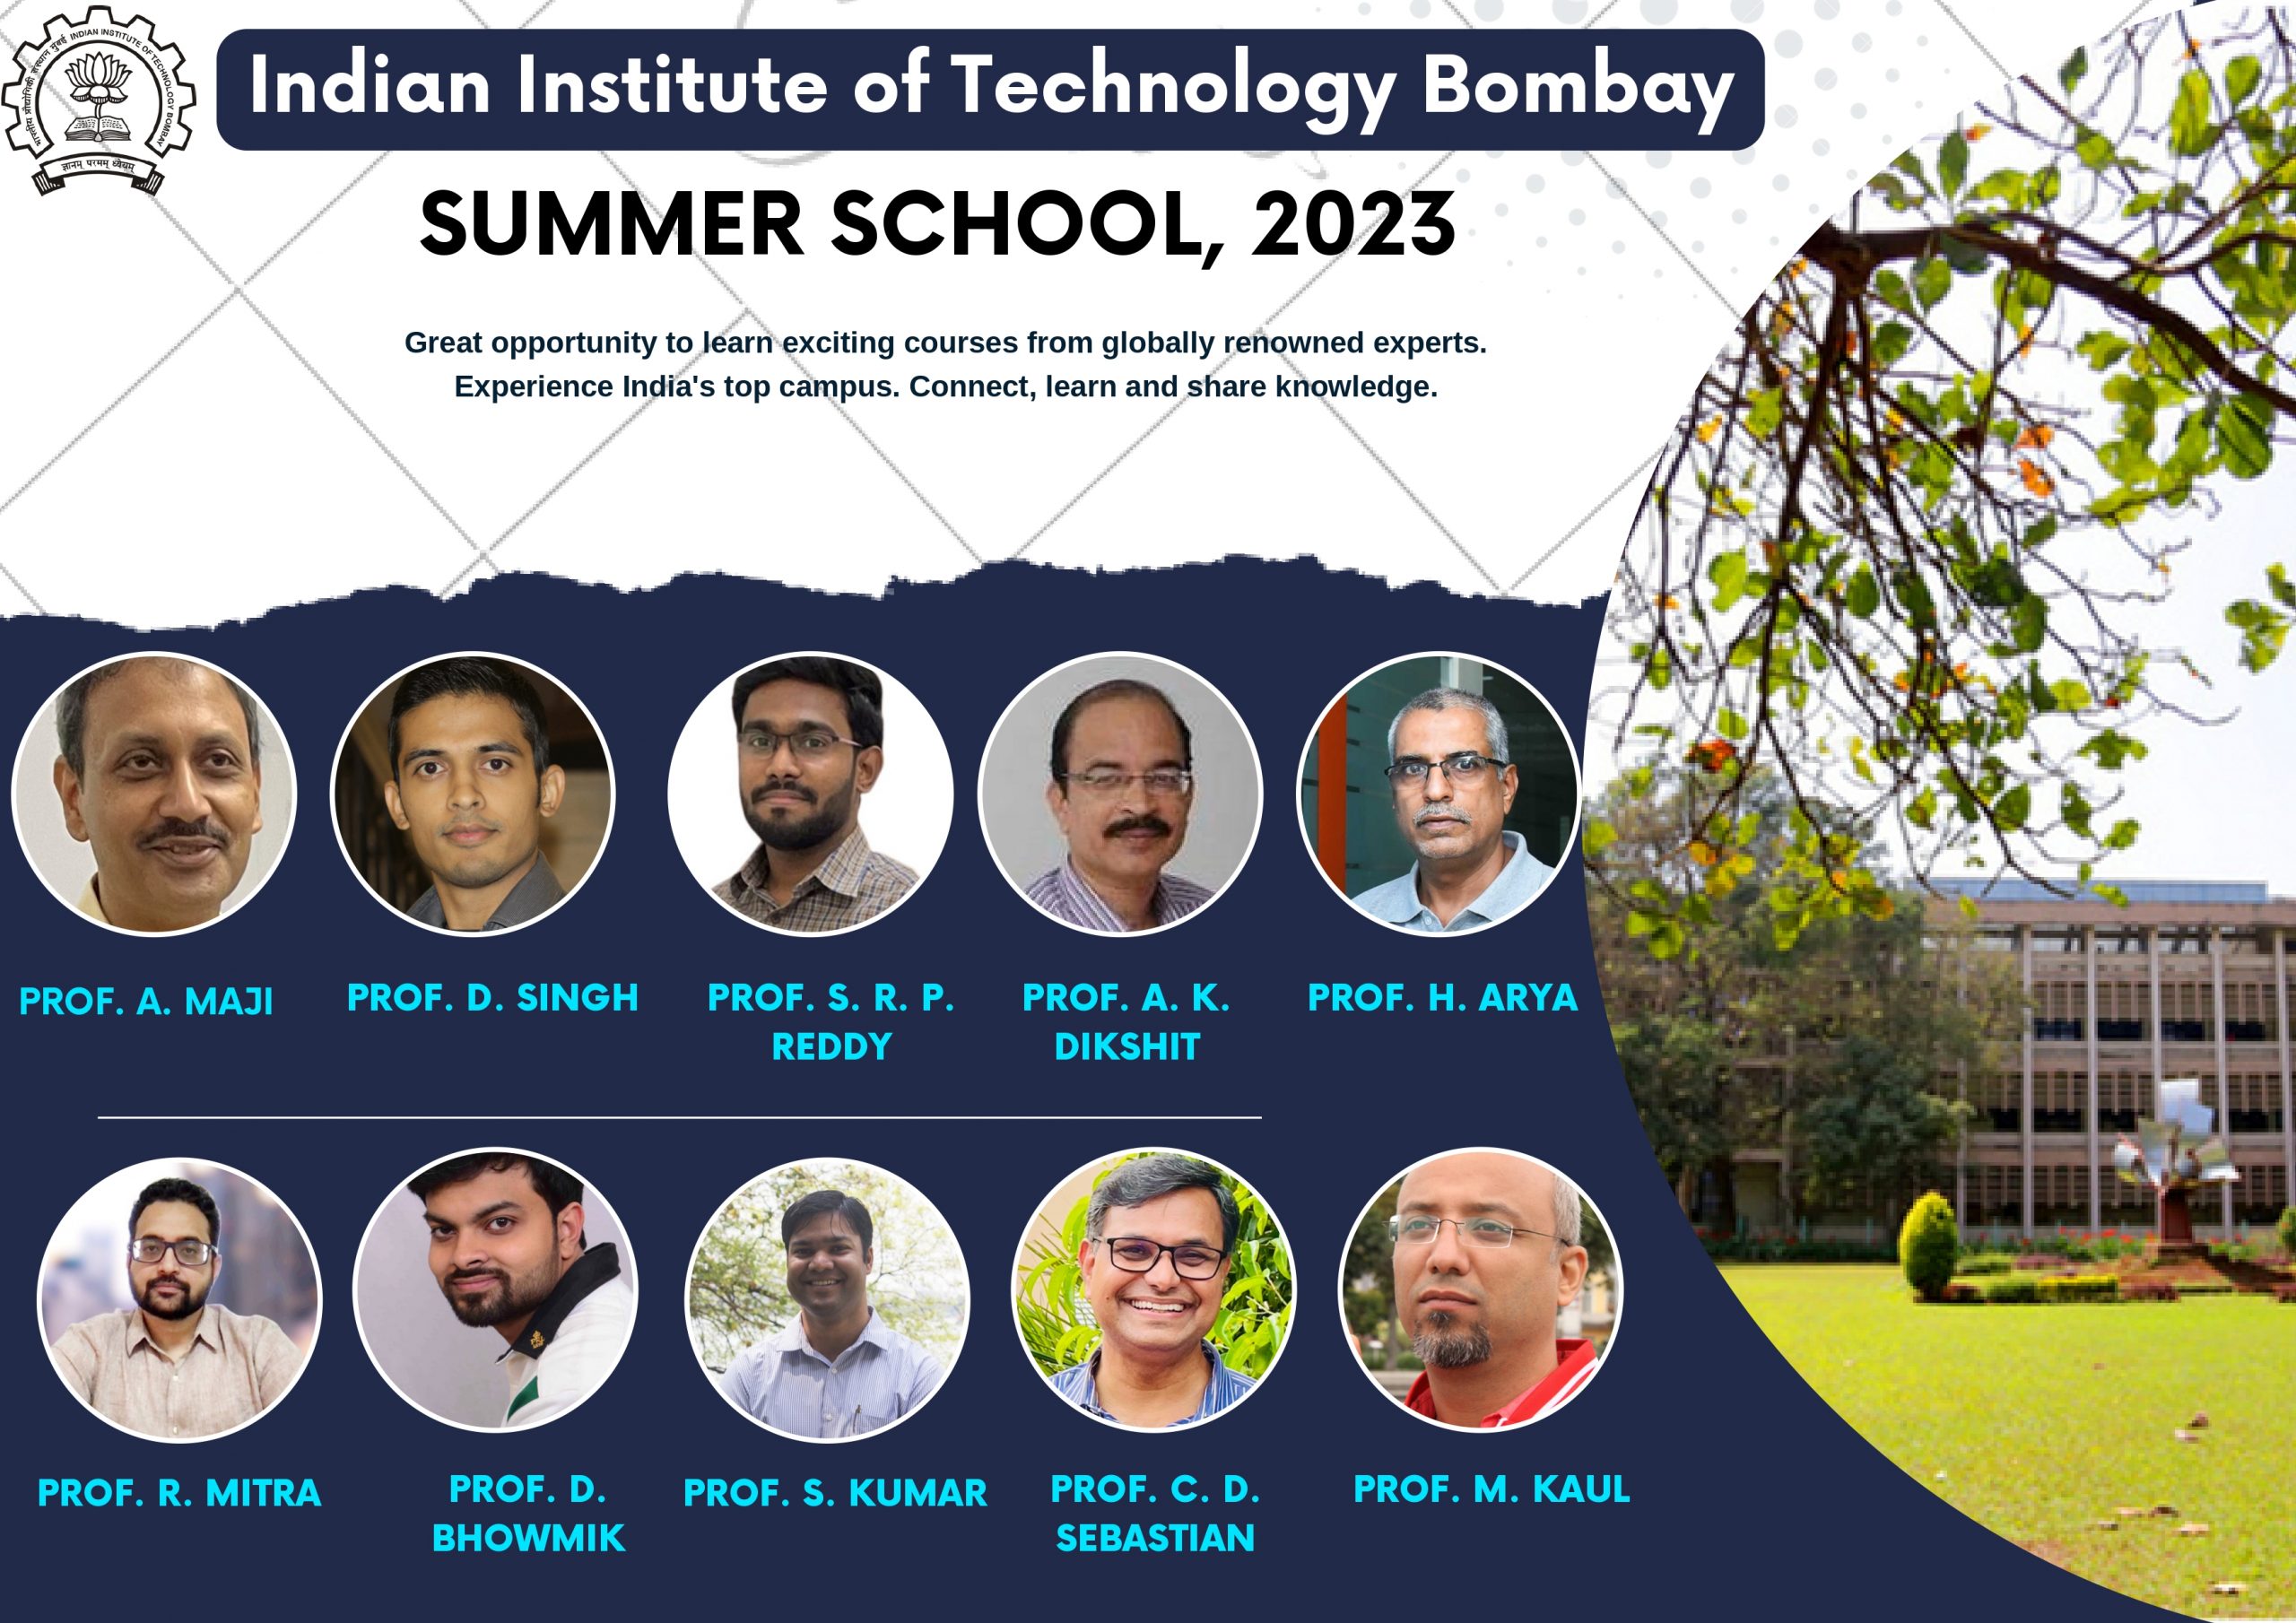 Offline Summer School, 2023 offered by Indian Institute of Technology Bombay